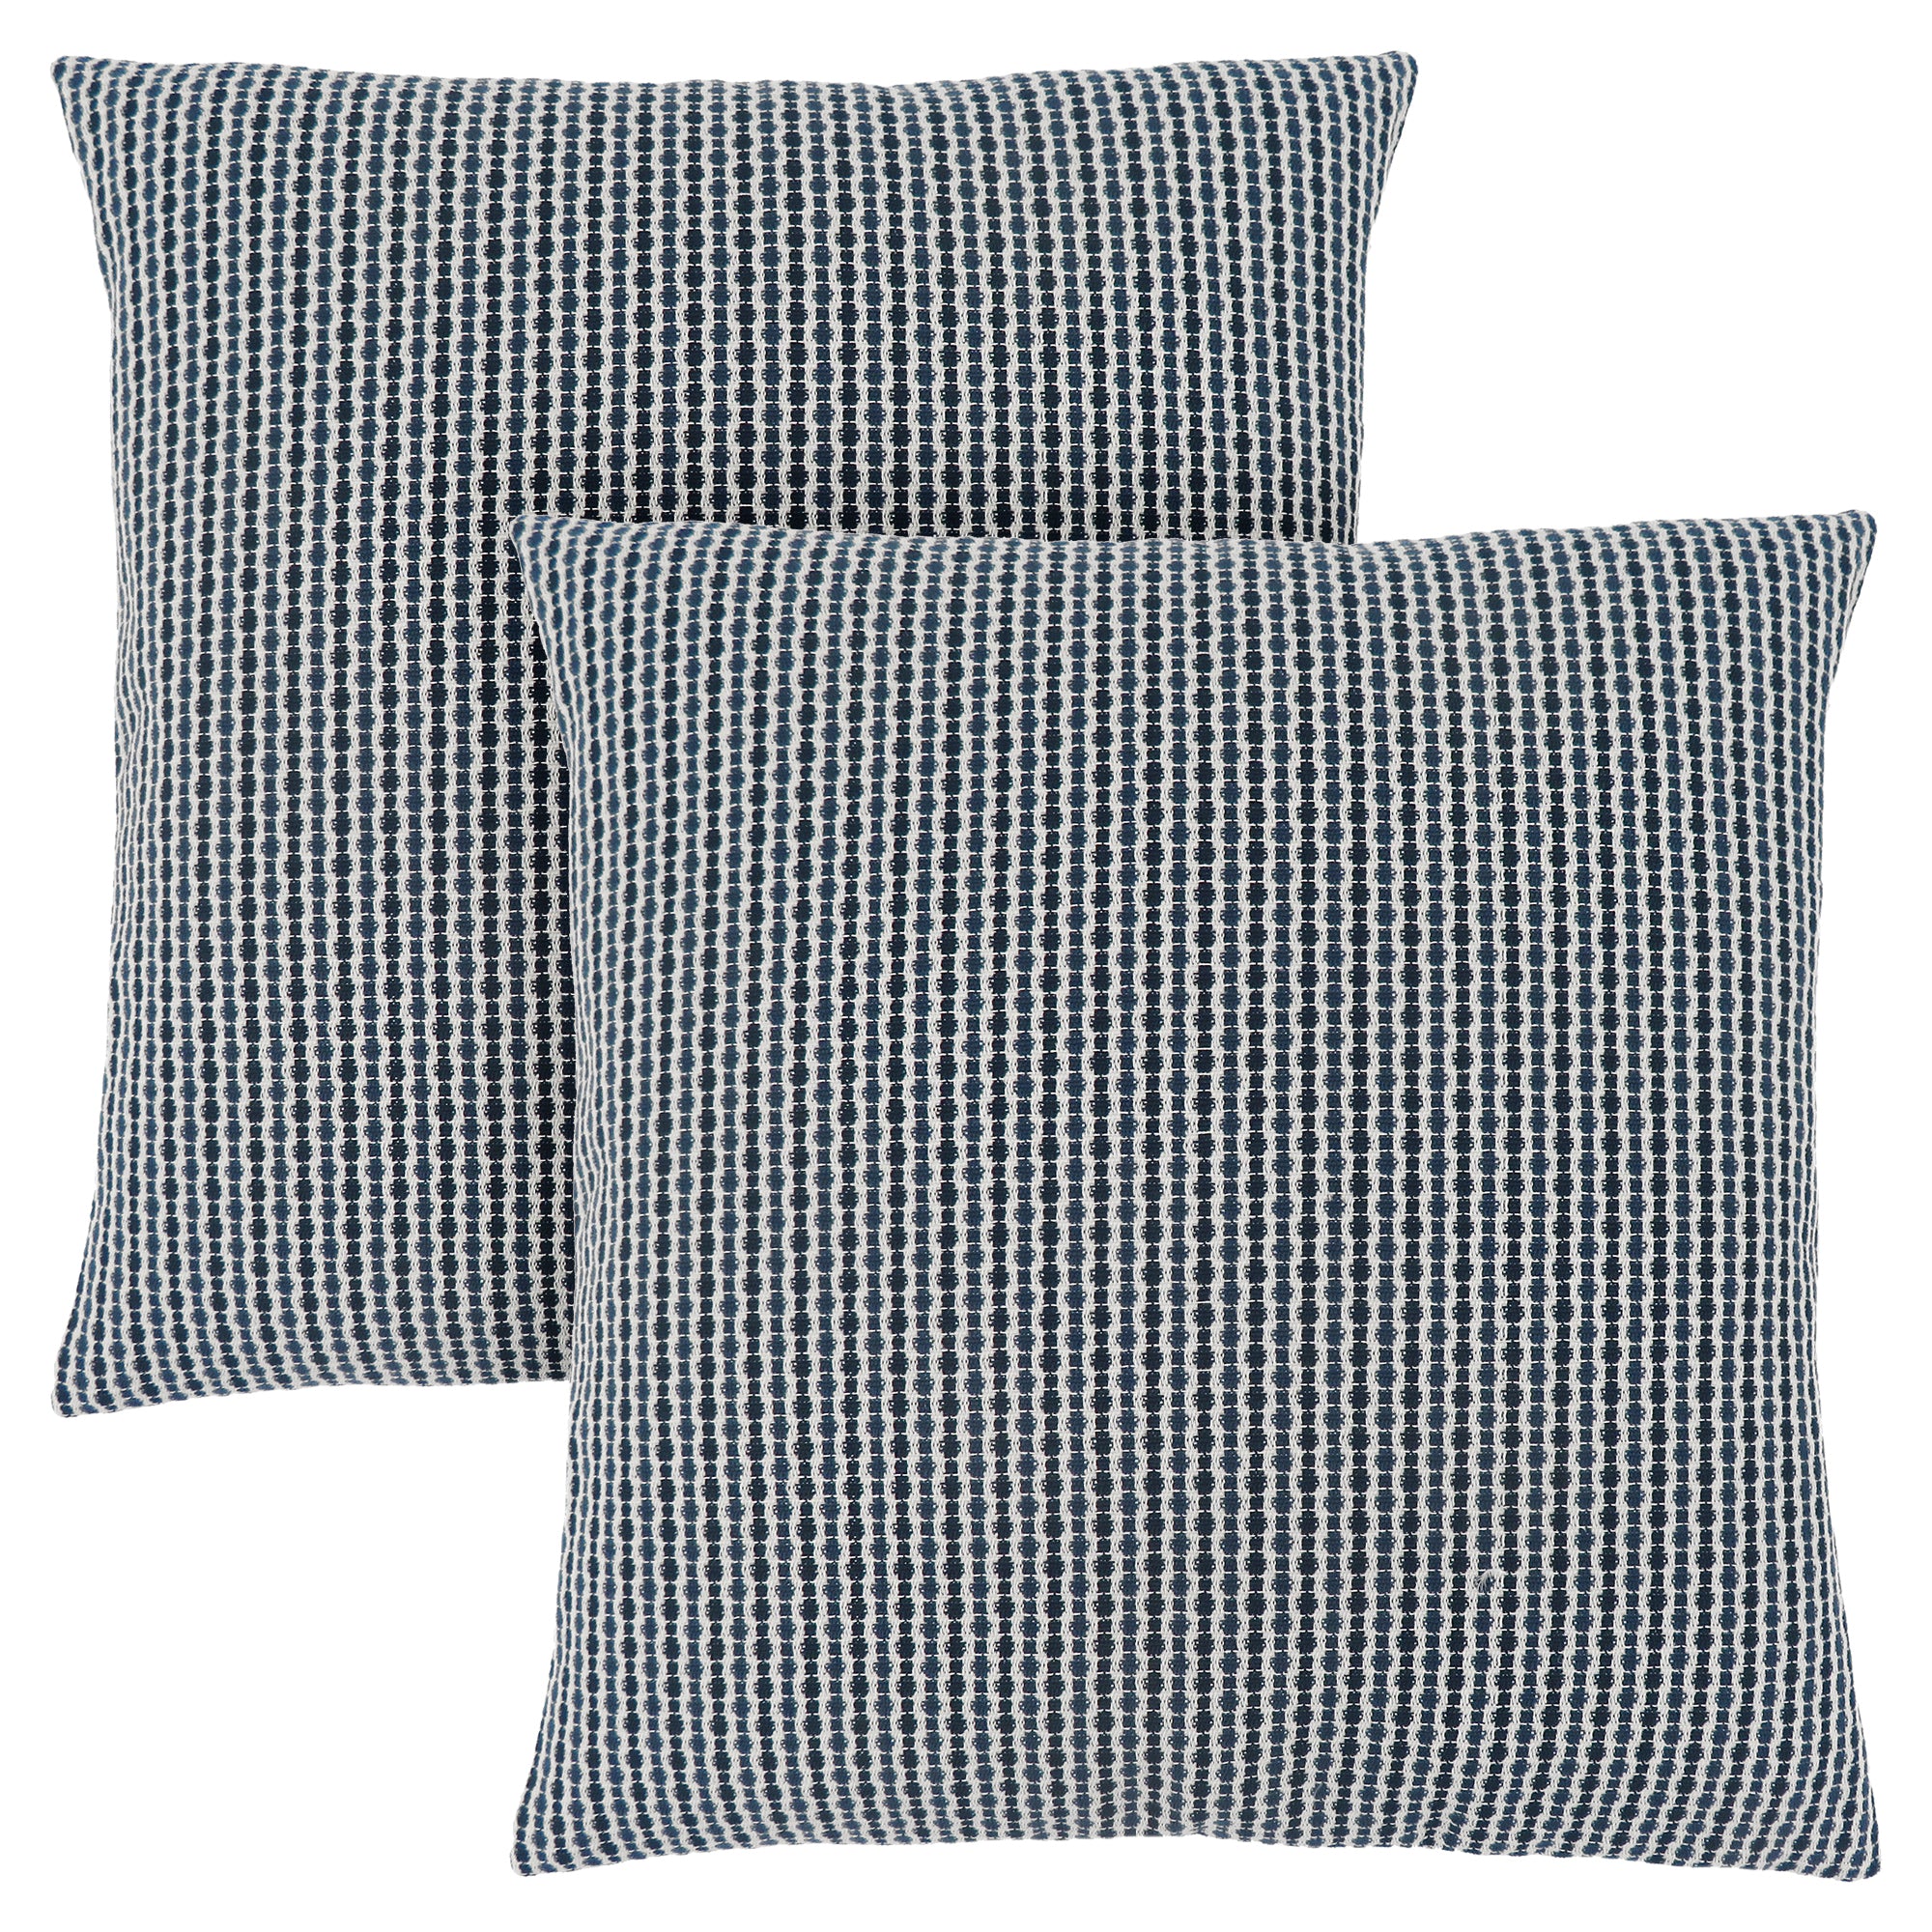 MN-539241    Pillows, Set Of 2, 18 X 18 Square, Insert Included, Decorative Throw, Accent, Sofa, Couch, Bed, Soft Polyester Woven Fabric, Hypoallergenic Soft Polyester Insert, Light And Dark Blue, Abstract Dot Design, Classic Dot Design, Classic